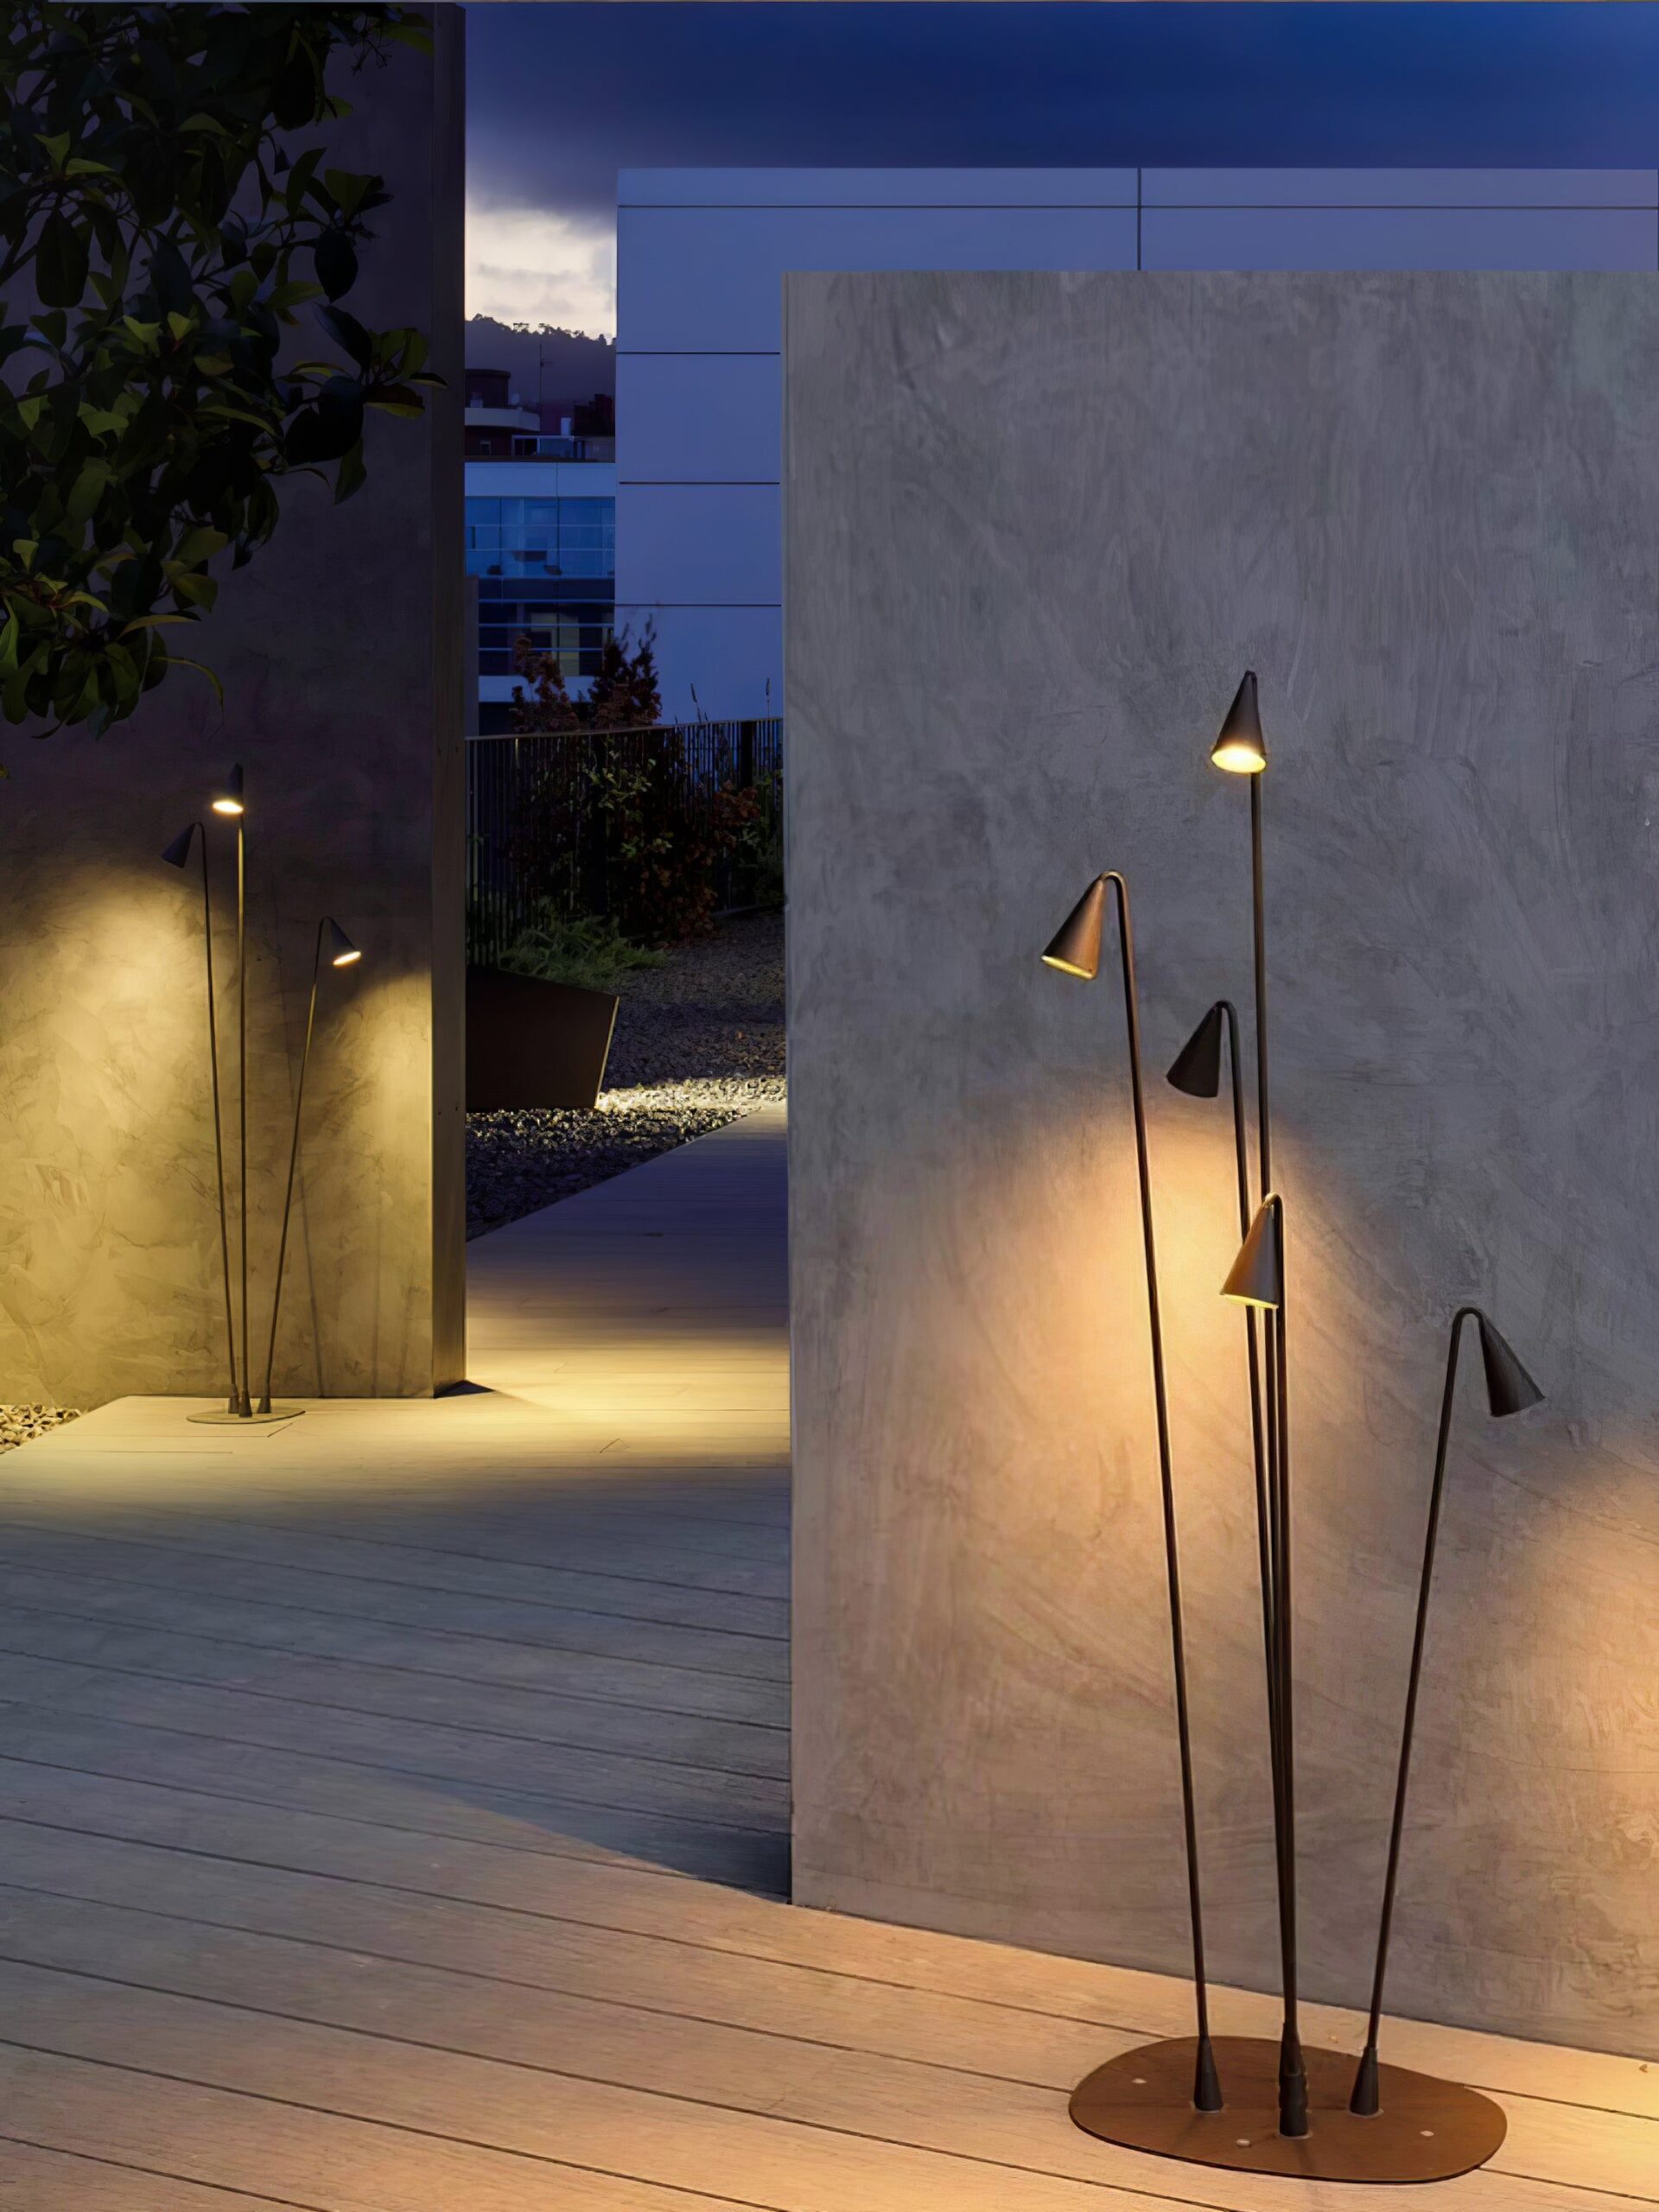 Outdoor Lighting Lamp : Illuminate Your Outdoor Space with Stylish Lighting Lamp Options